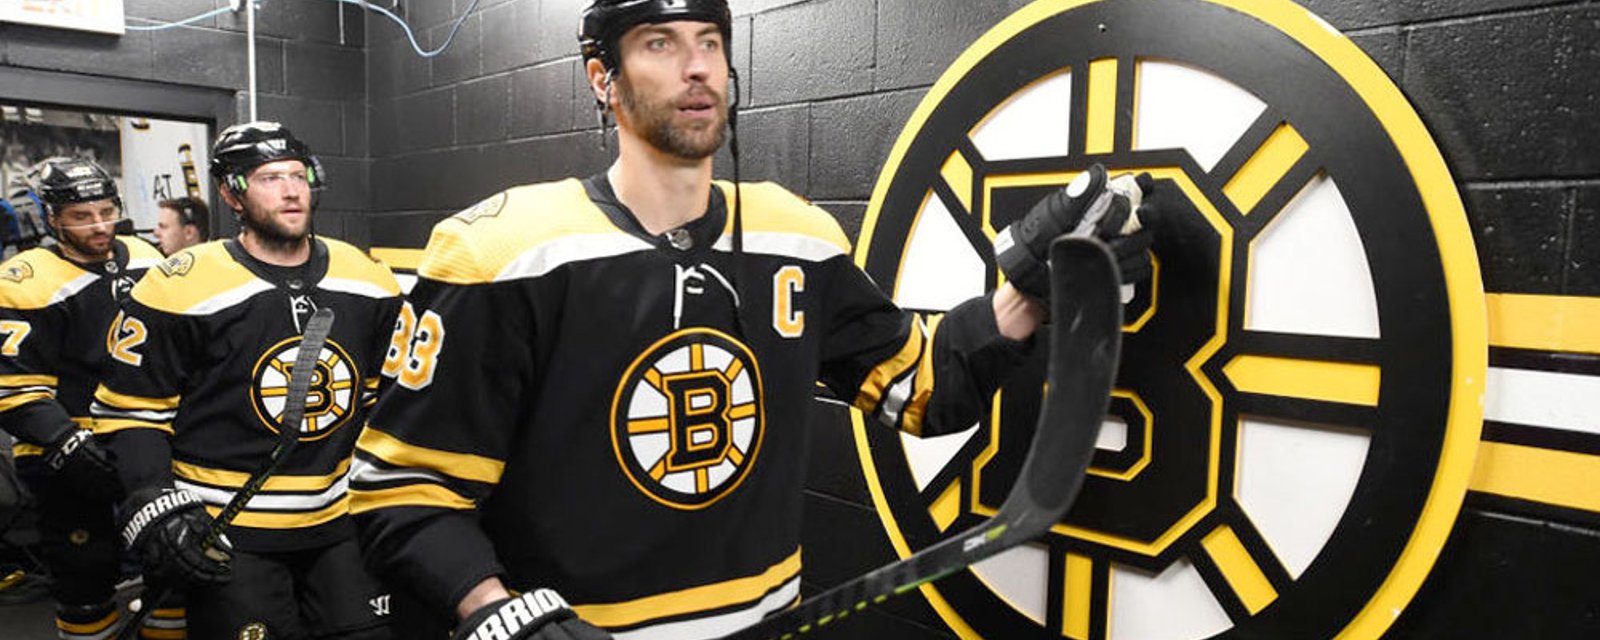 Leaked images of Bruins new third jersey